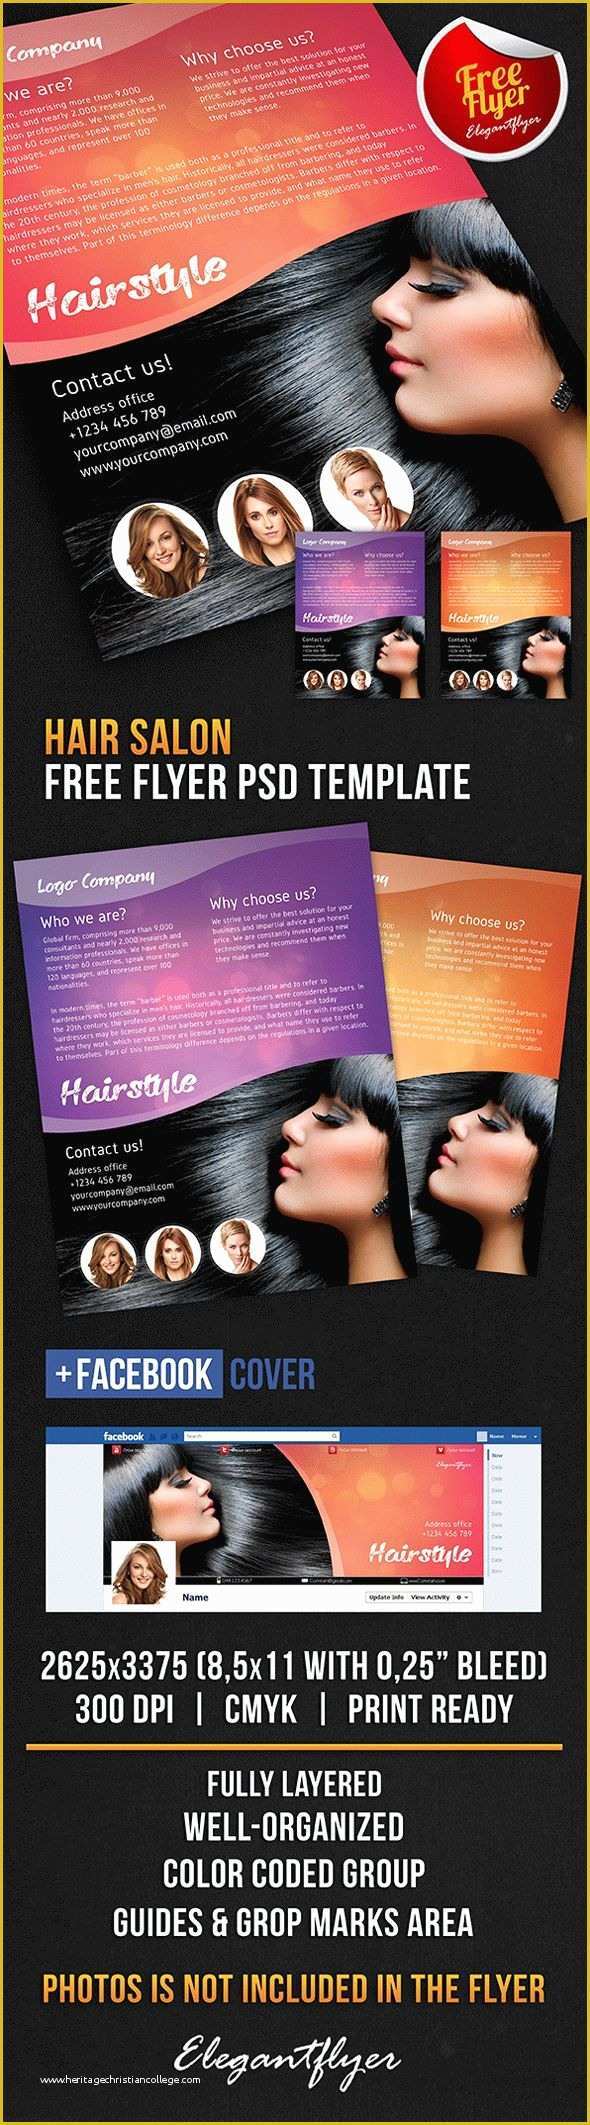 Free Like Us On Facebook Flyer Template Of Hair Salon Free Flyer Psd Template Cover